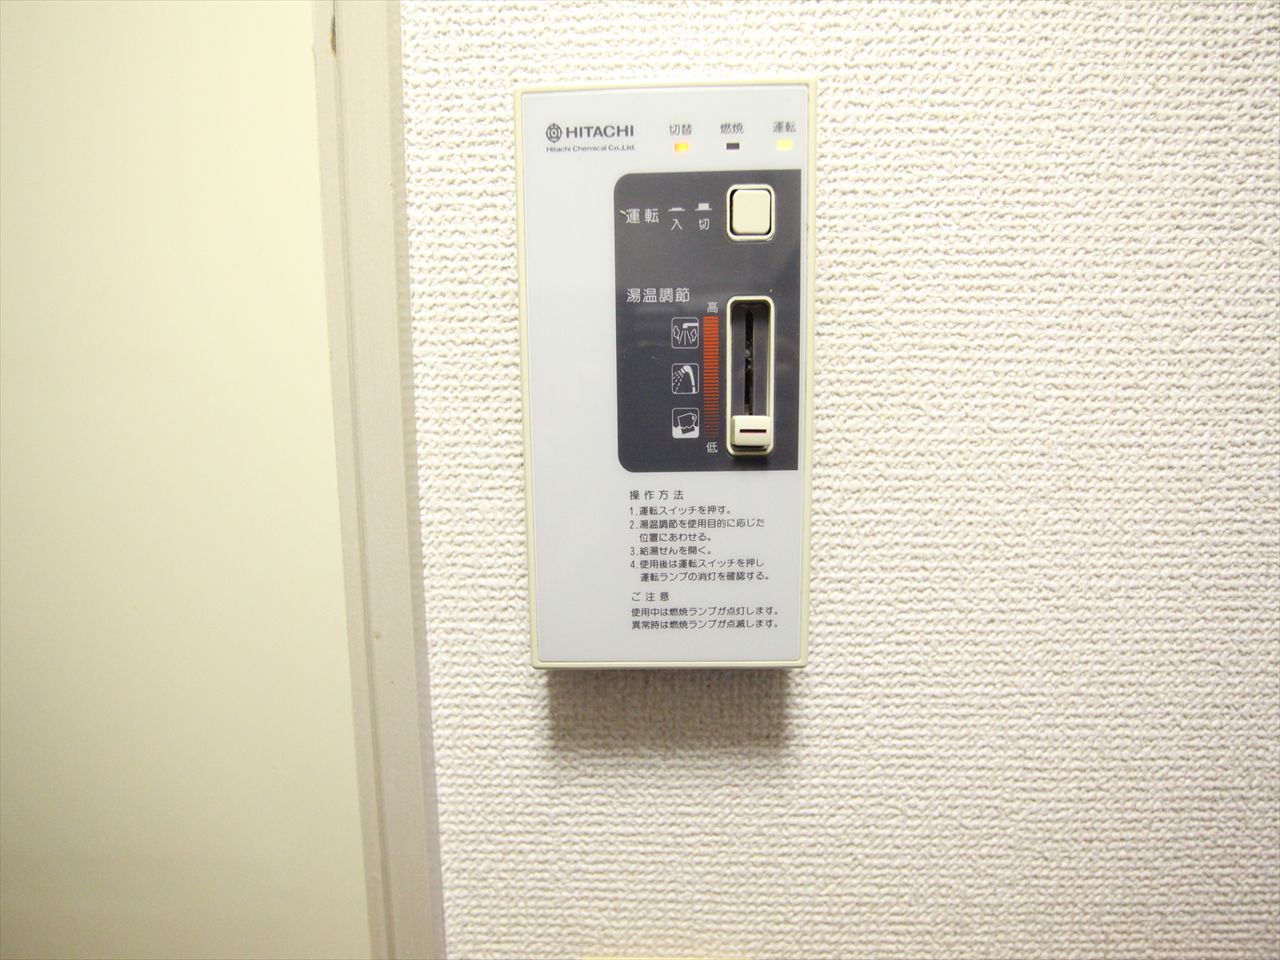 Other. Hot water supply switch